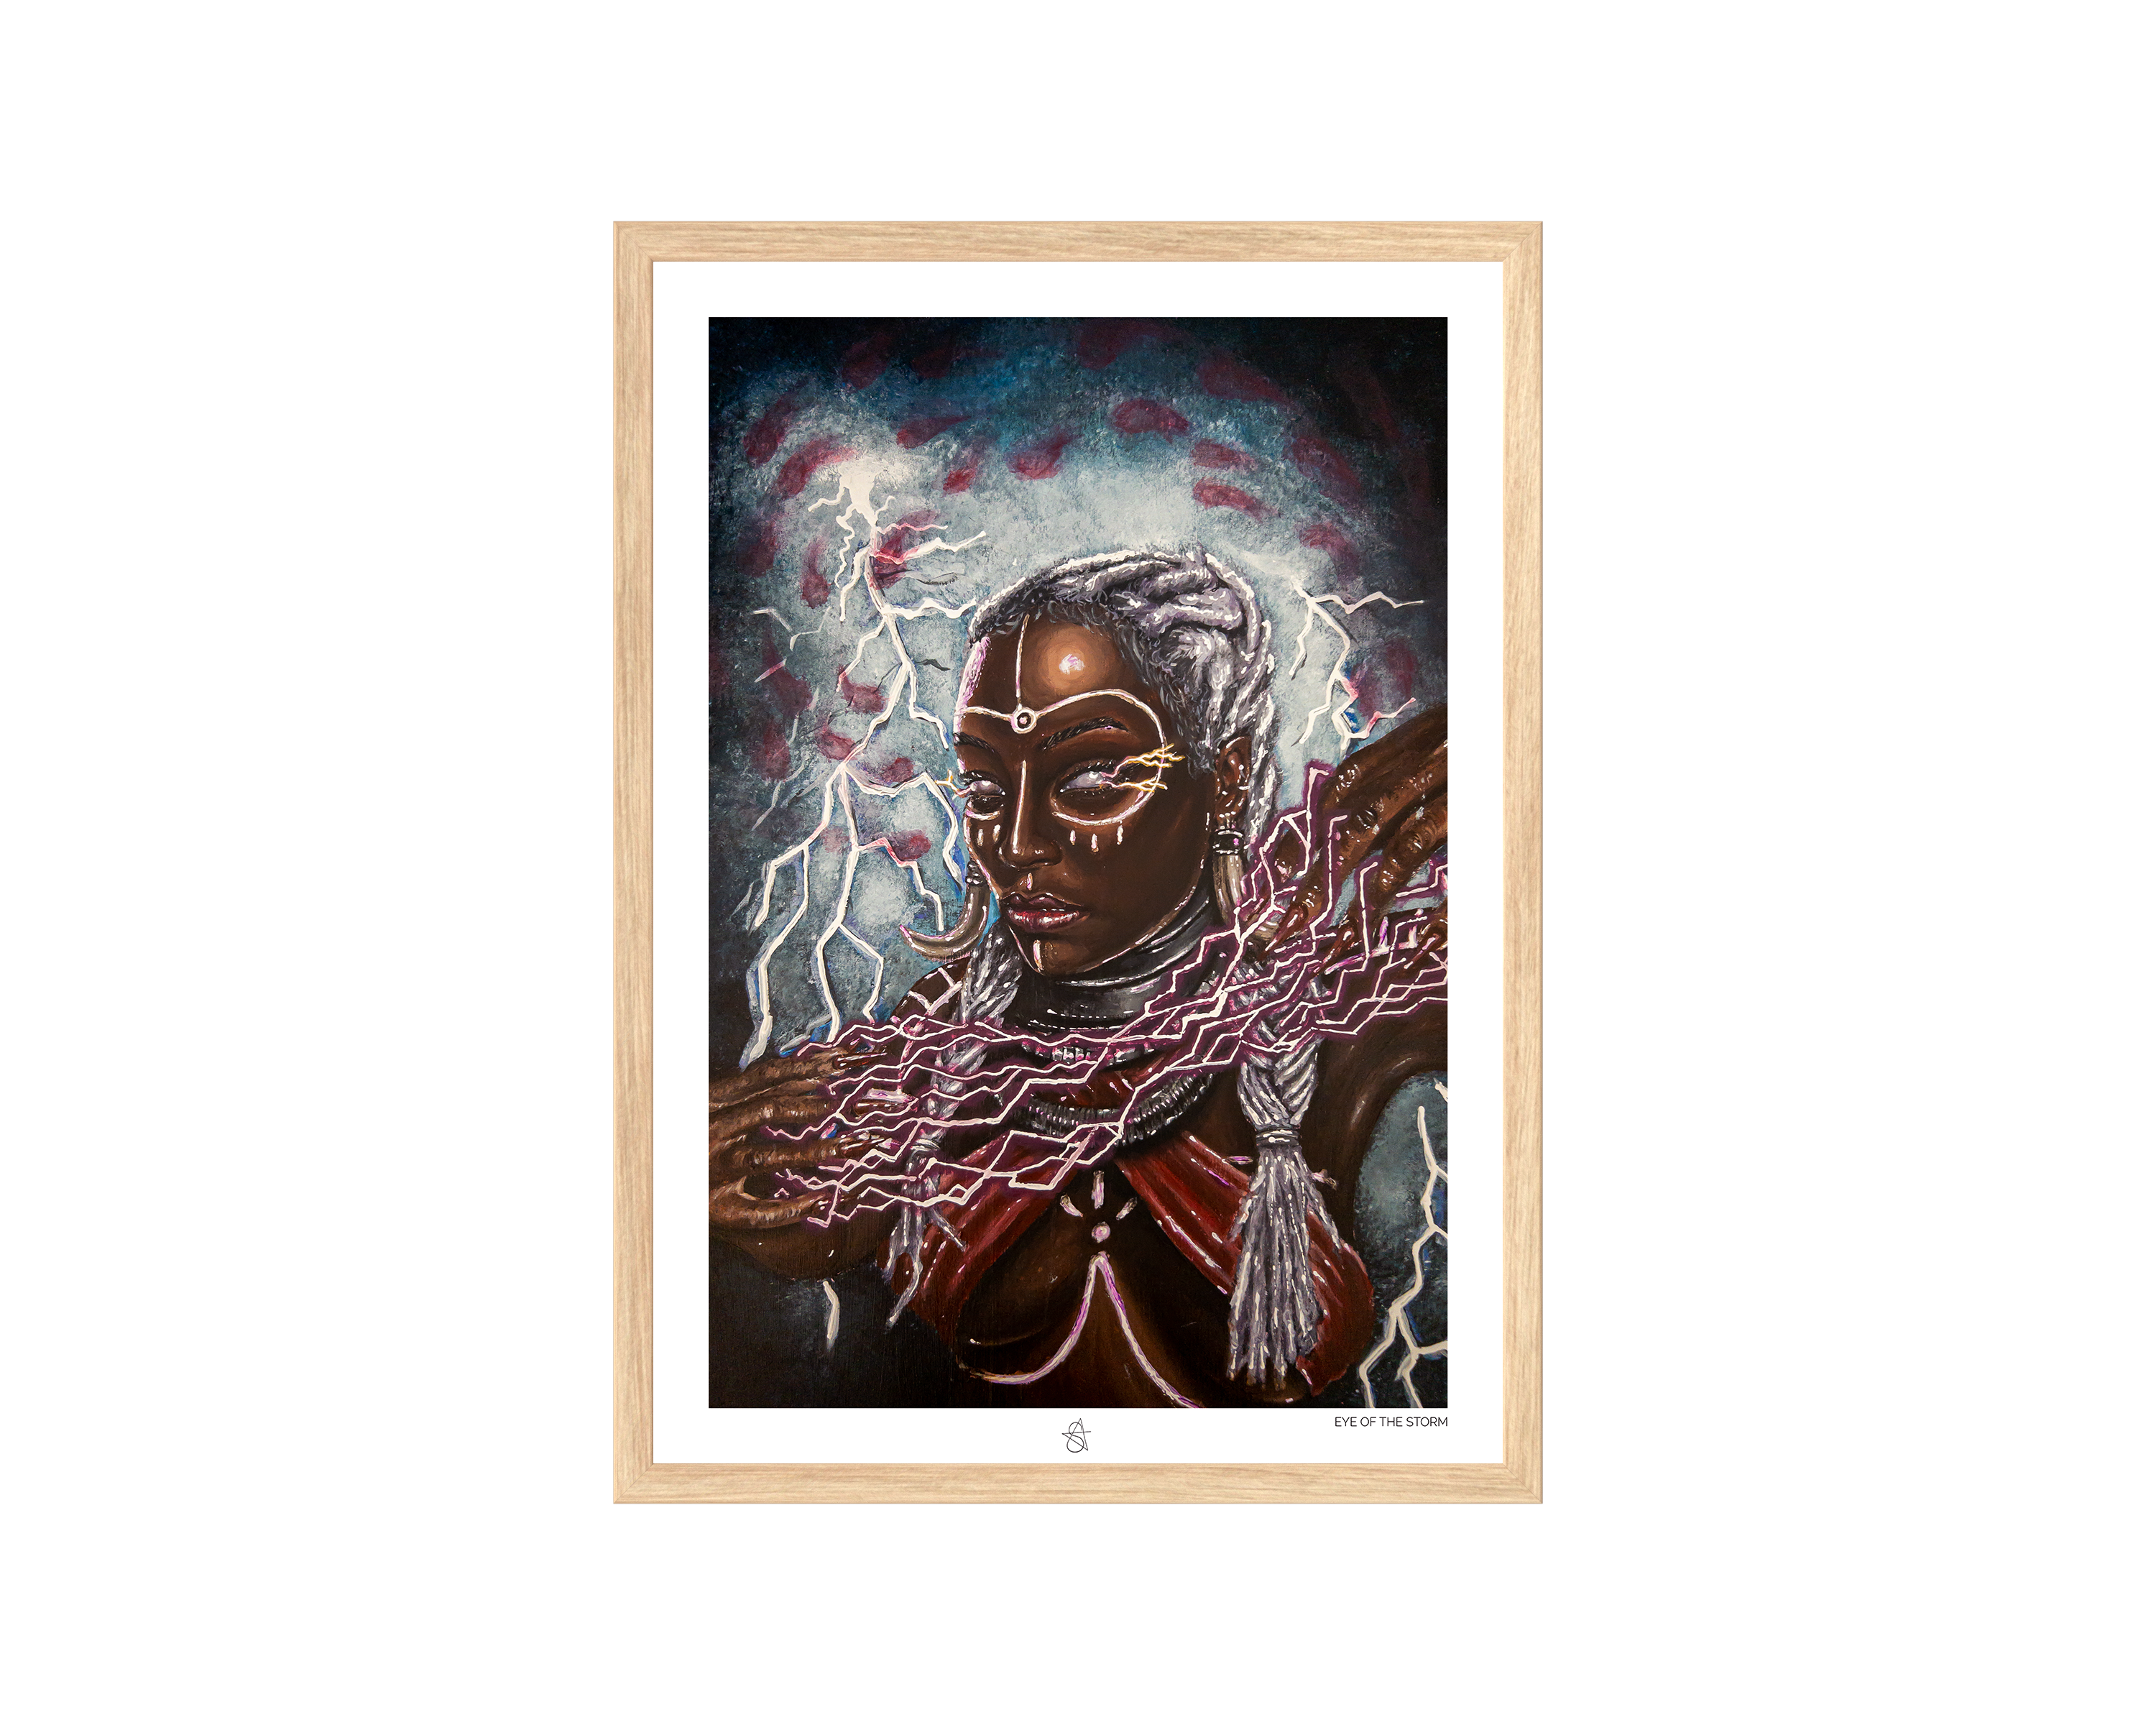 Ọya Art Print on high-quality matte or velvet paper, framed in gallery black, white, or natural maple, depicting Yoruba Orisa of storms and wind.